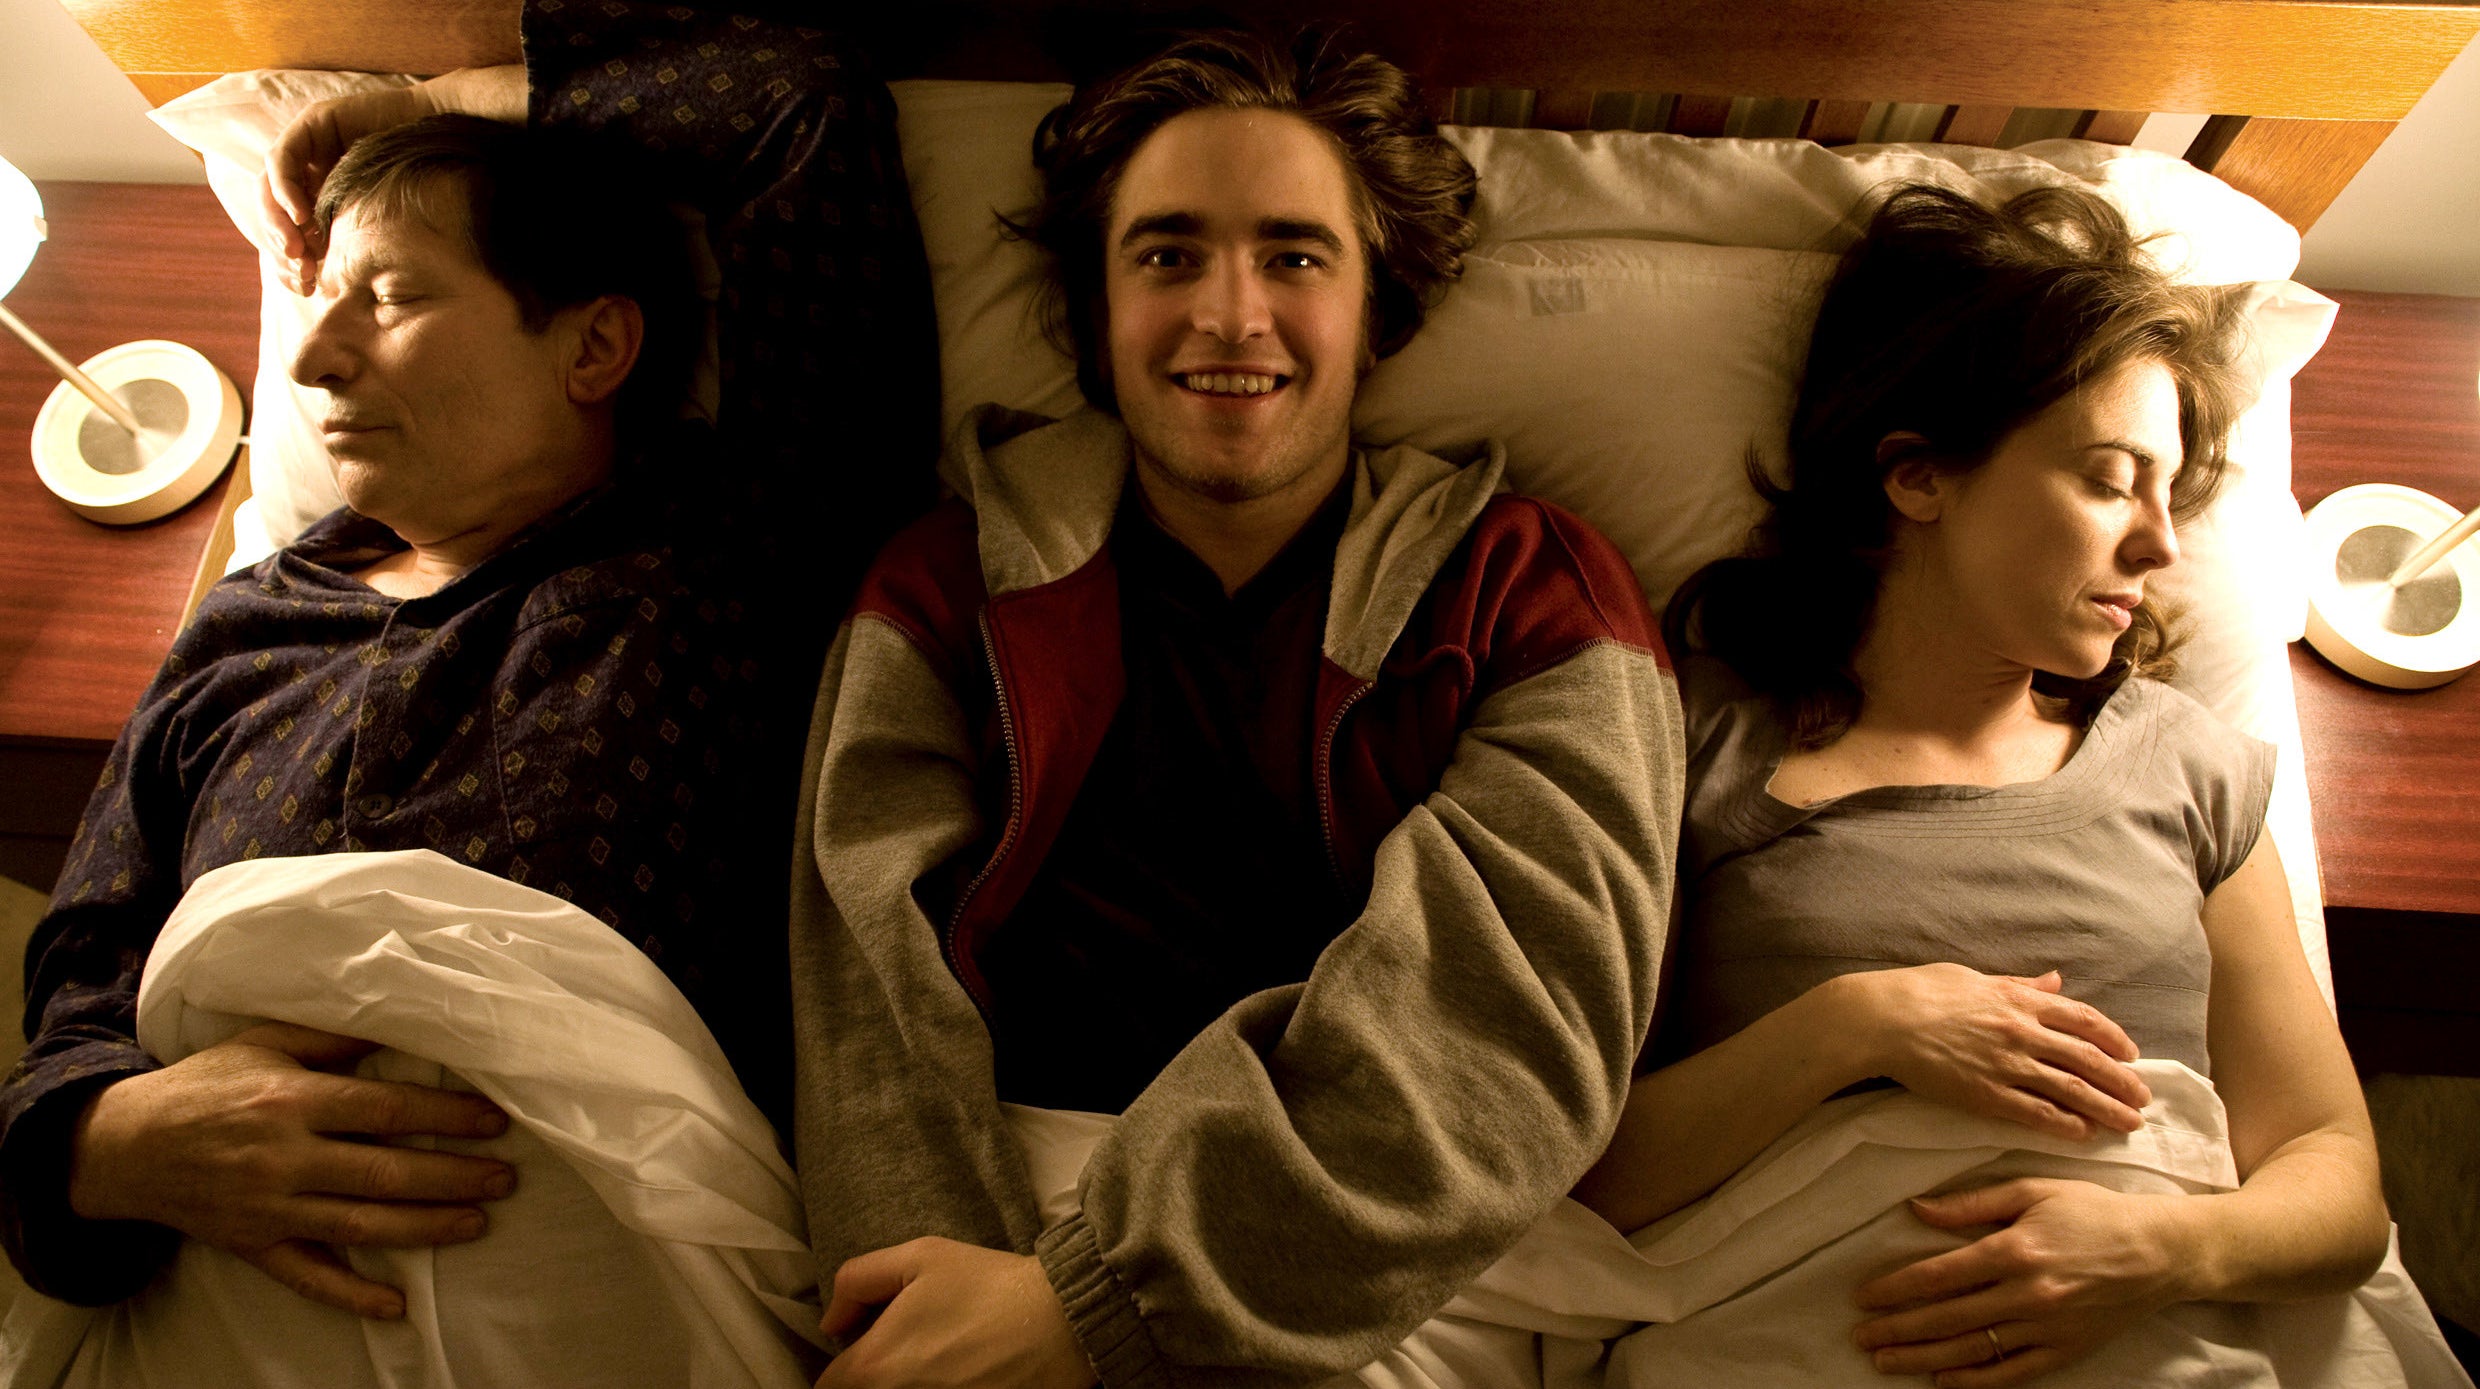 Robert Pattinson in bed with his parents on either side of him